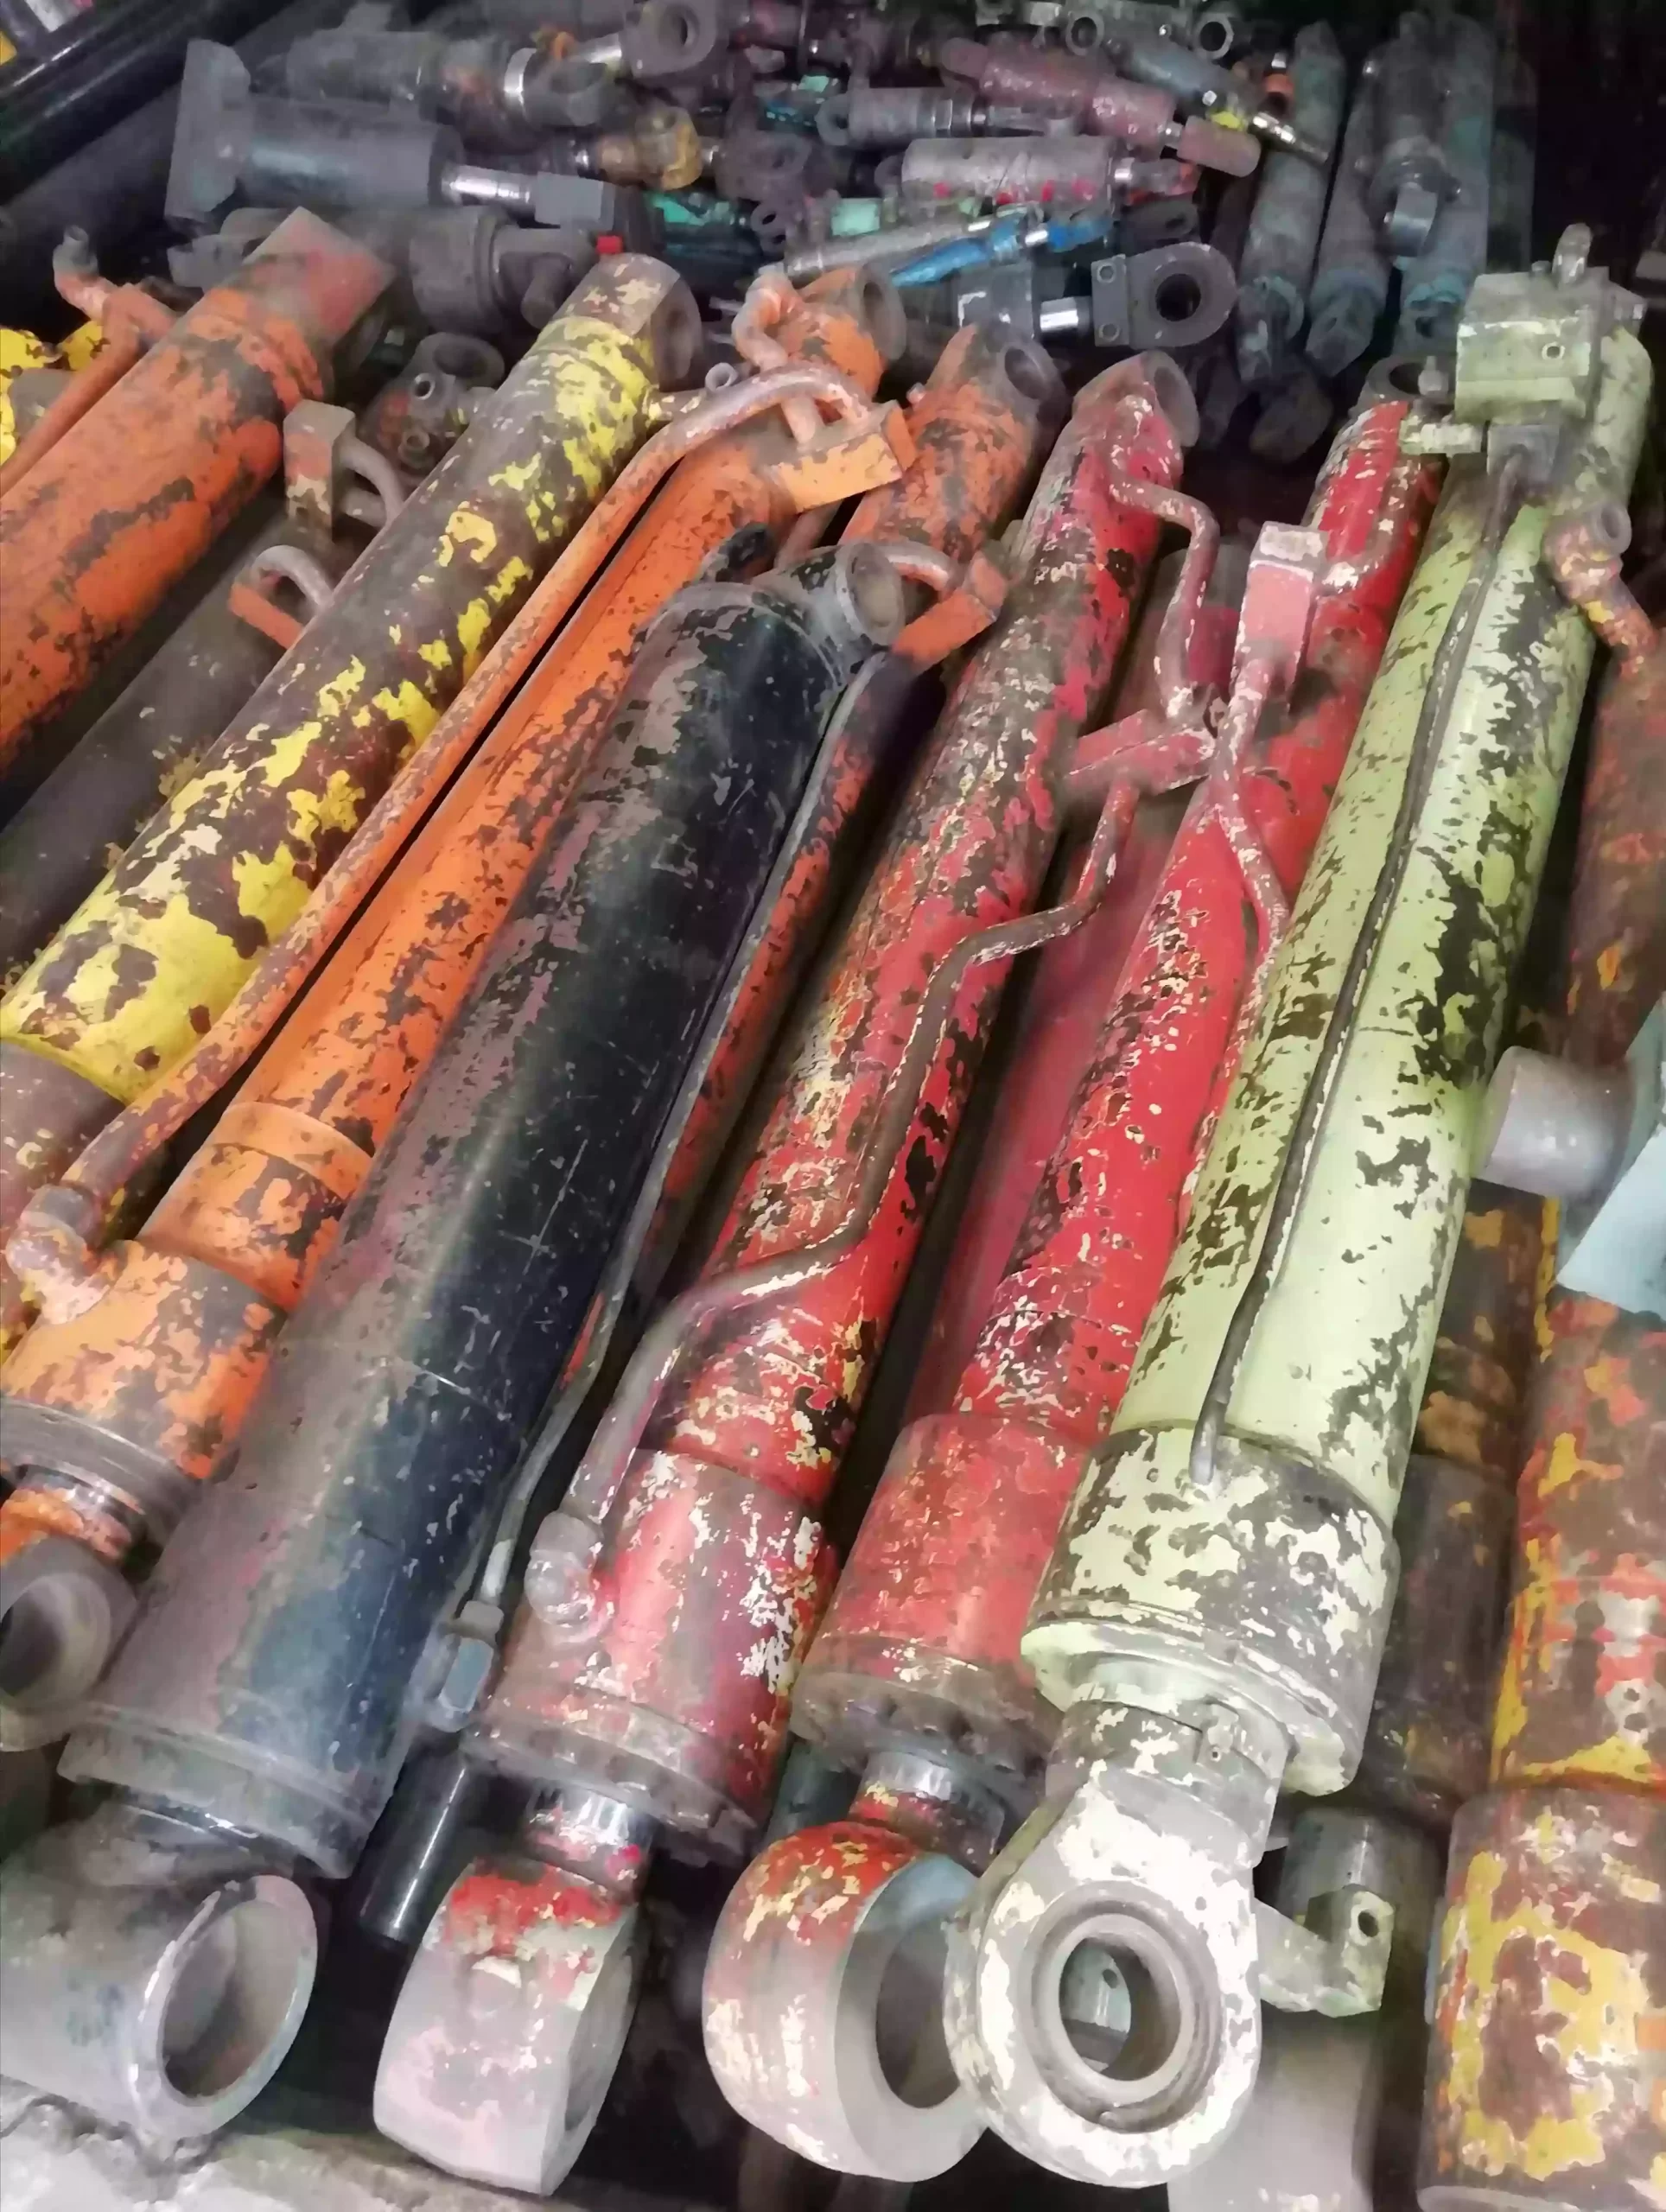 Scrap Hydraulic, Mechanical metals From Shipyards, Mills, Factories Available Stock in Pride Bangladesh. Call: +8801881212987